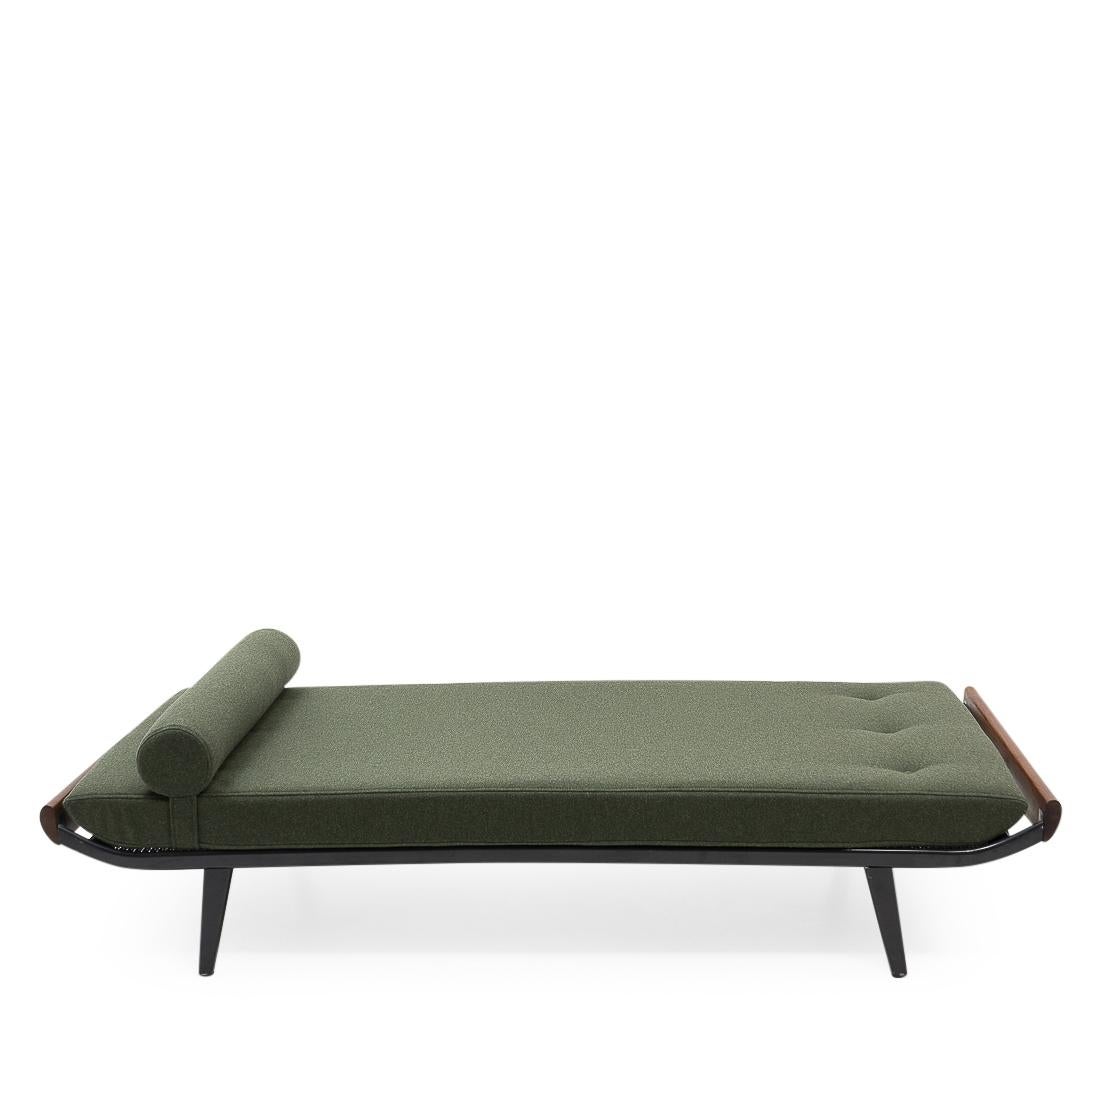 Vintage daybed designed by Dick Cordemijer for Auping (the Netherlands) during the 1950s.
New high-quality green woolen upholstery and foam; the daybed can be used as both a sofa and spare bed. The cover features a zipper on both pillow and